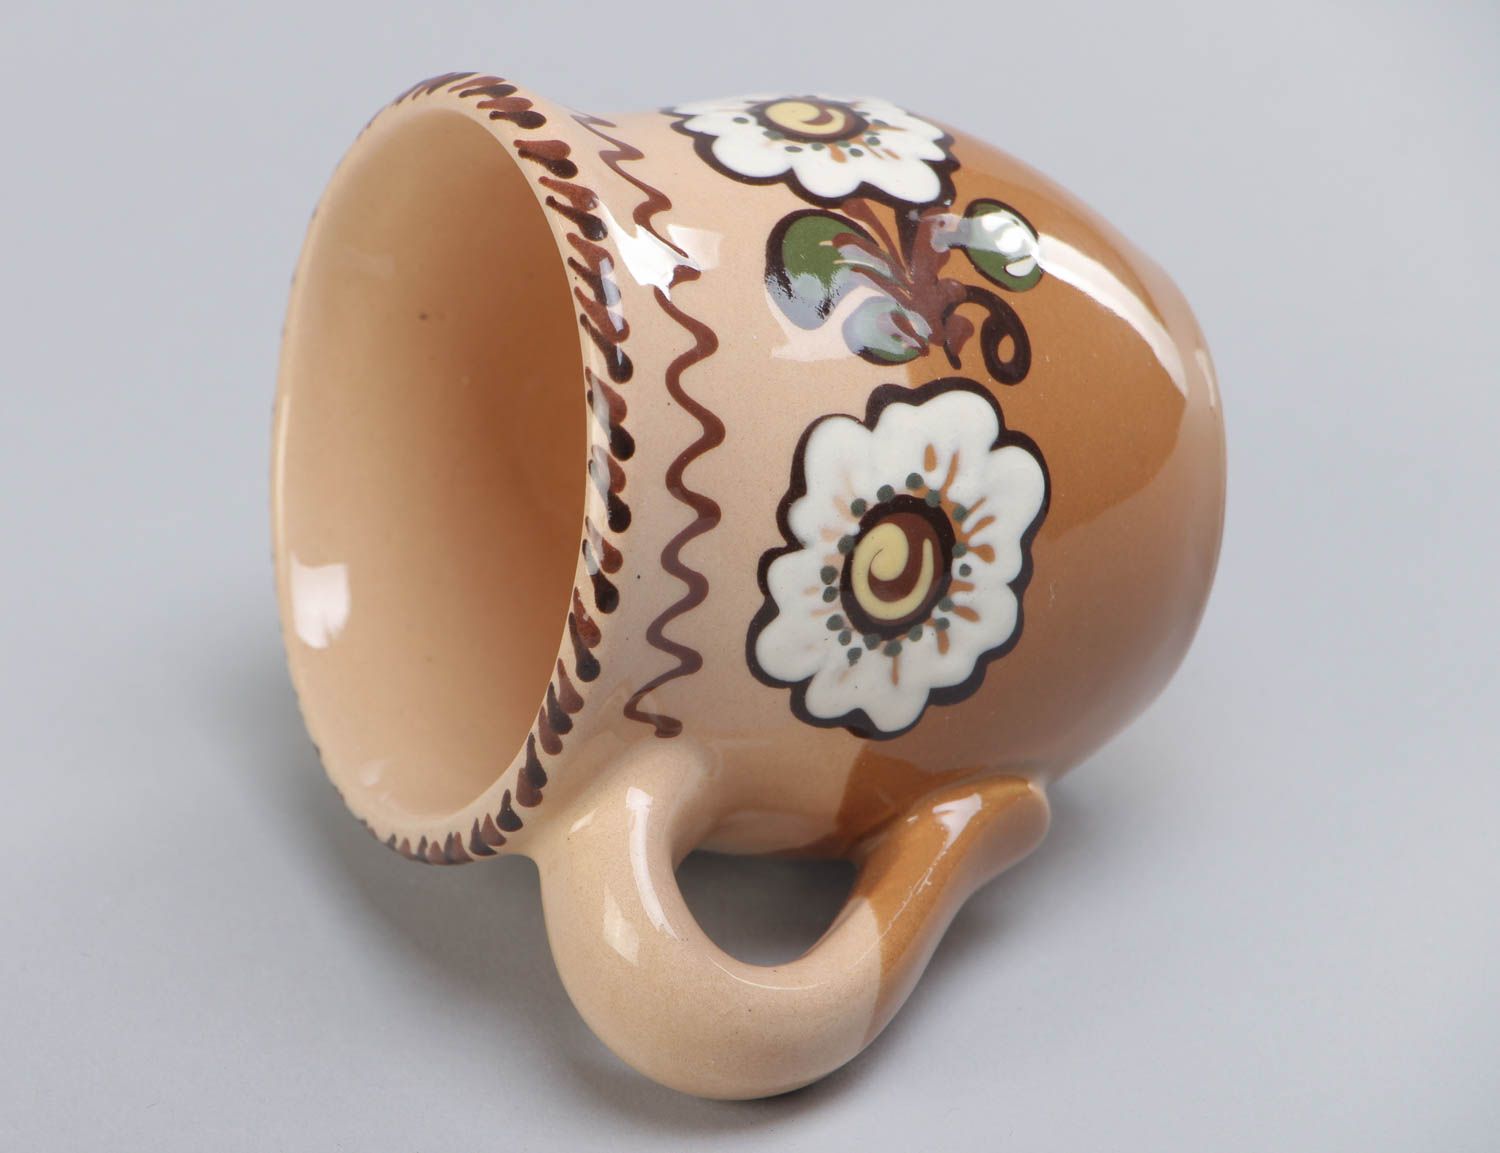 8 oz porcelain handmade coffee cup with handle and floral ornament 0,8 lb photo 4